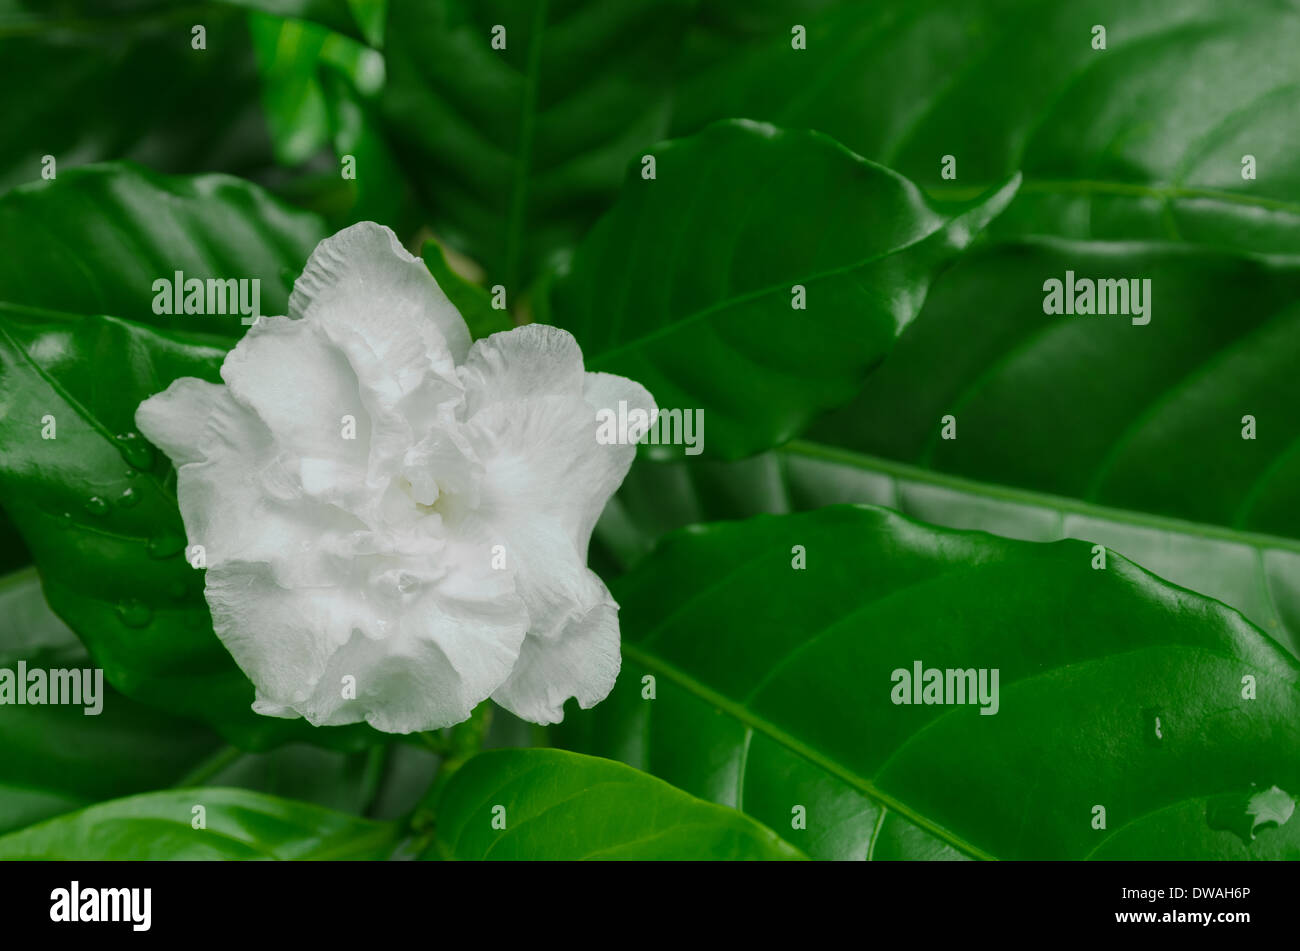 Beauty of white flower with green leaf from natural Stock Photo